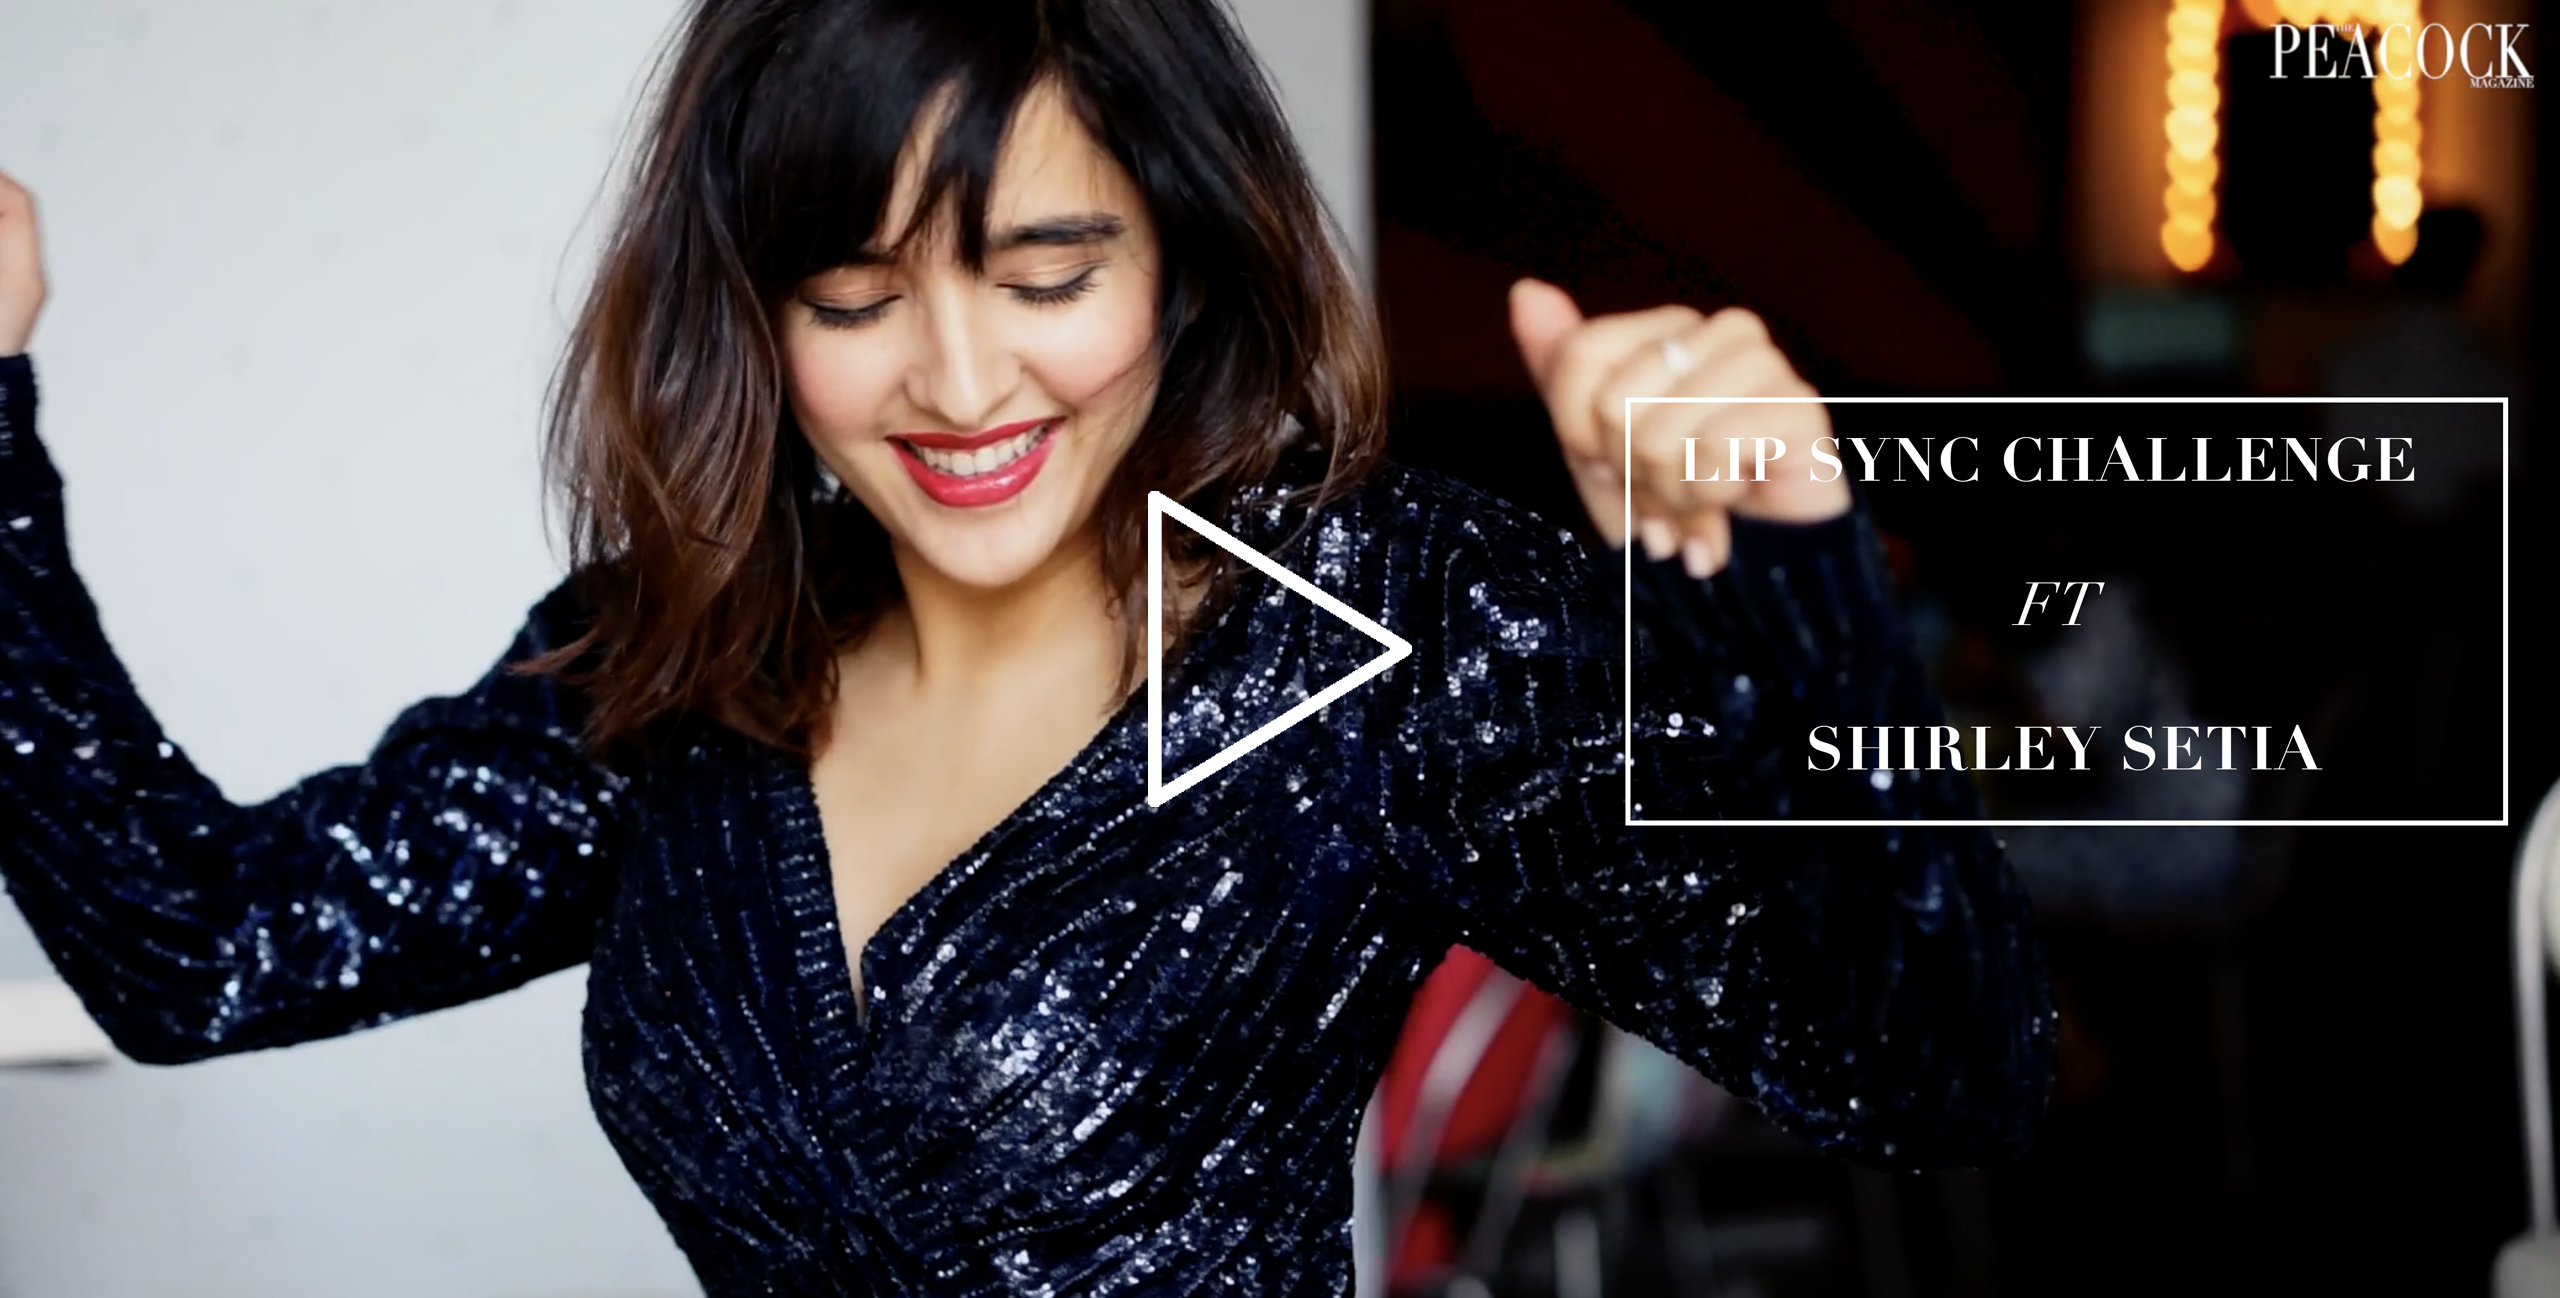 SHIRLEY SETIA Archives - The Peacock Magazine